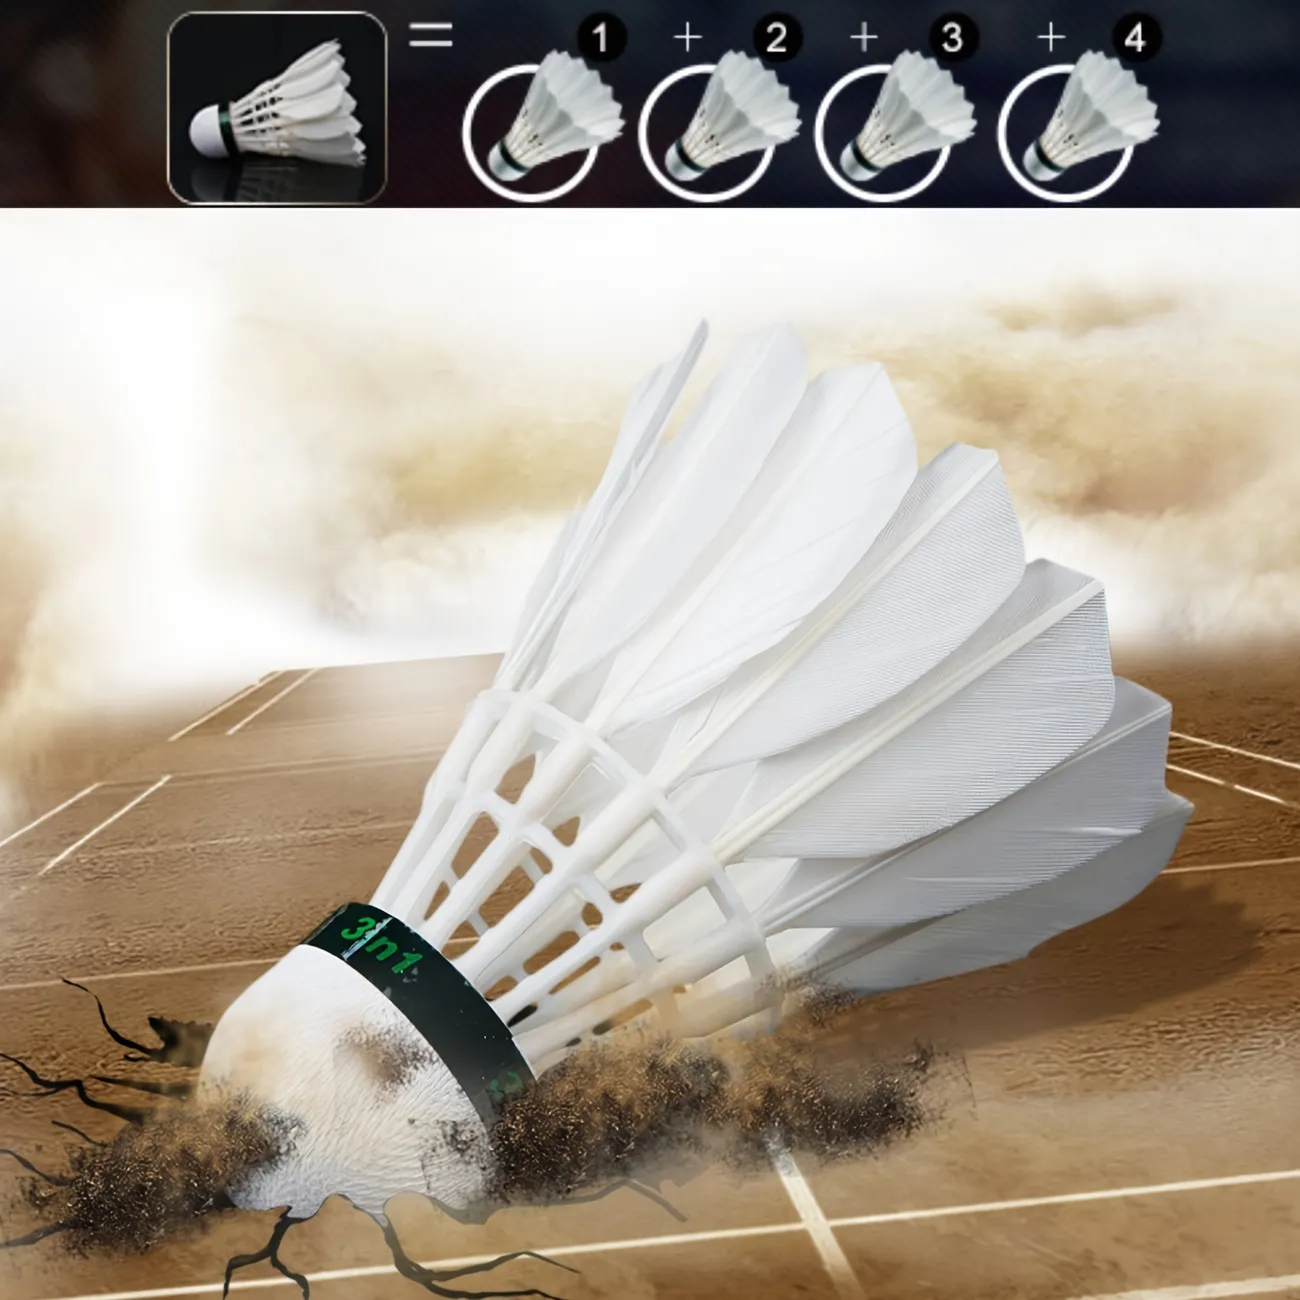 Professional-grade Badminton Shuttlecocks - Gooes Feather Badminton Shuttles With High Stability and 3-in-1 Balls